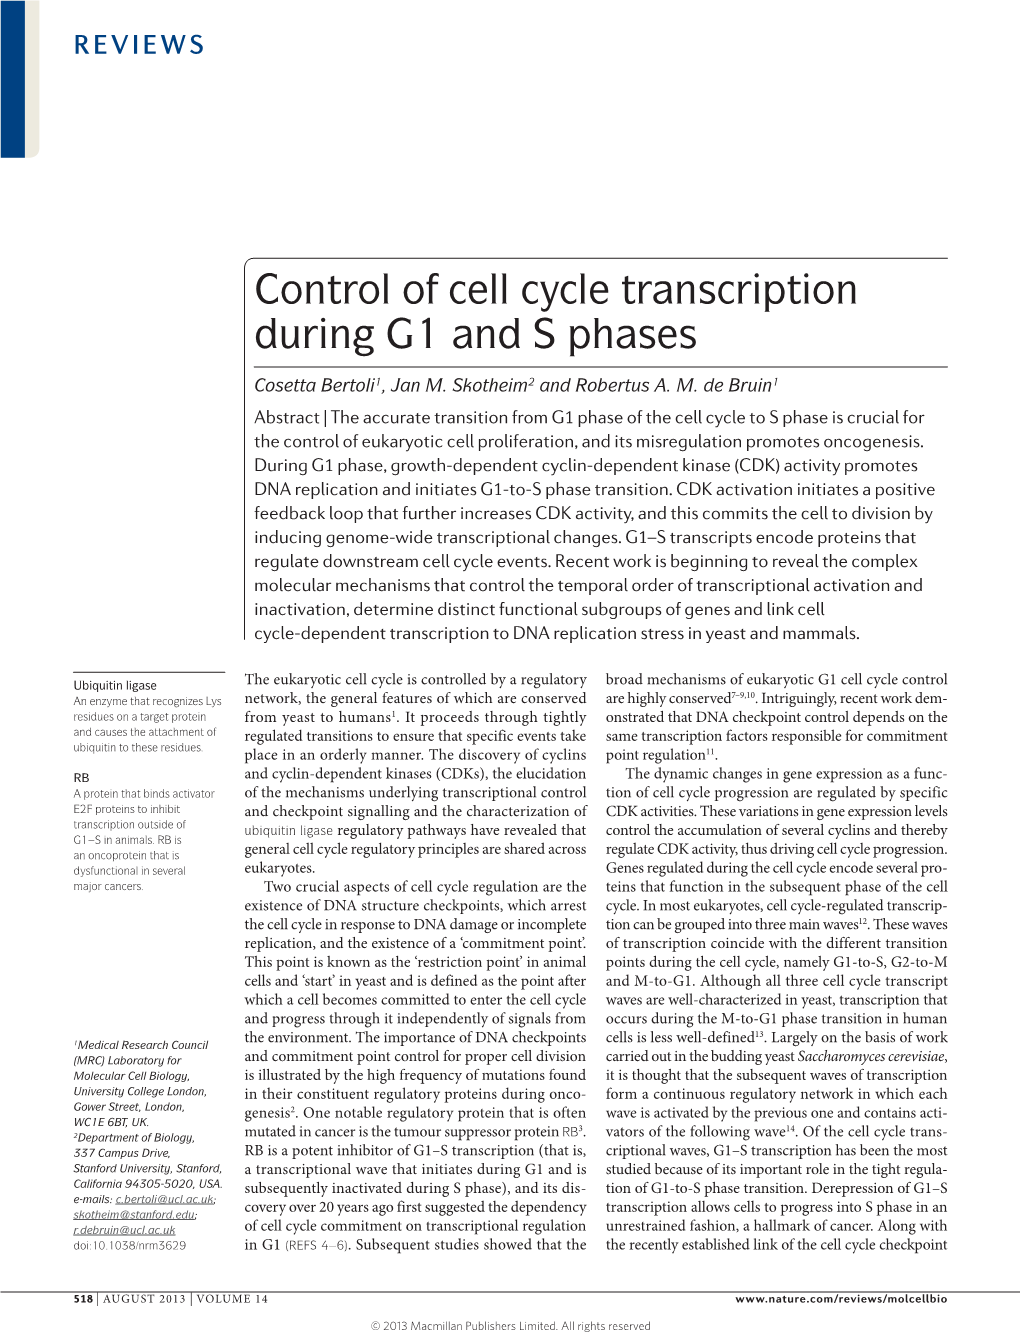 Control of Cell Cycle Transcription During G1 and S Phases